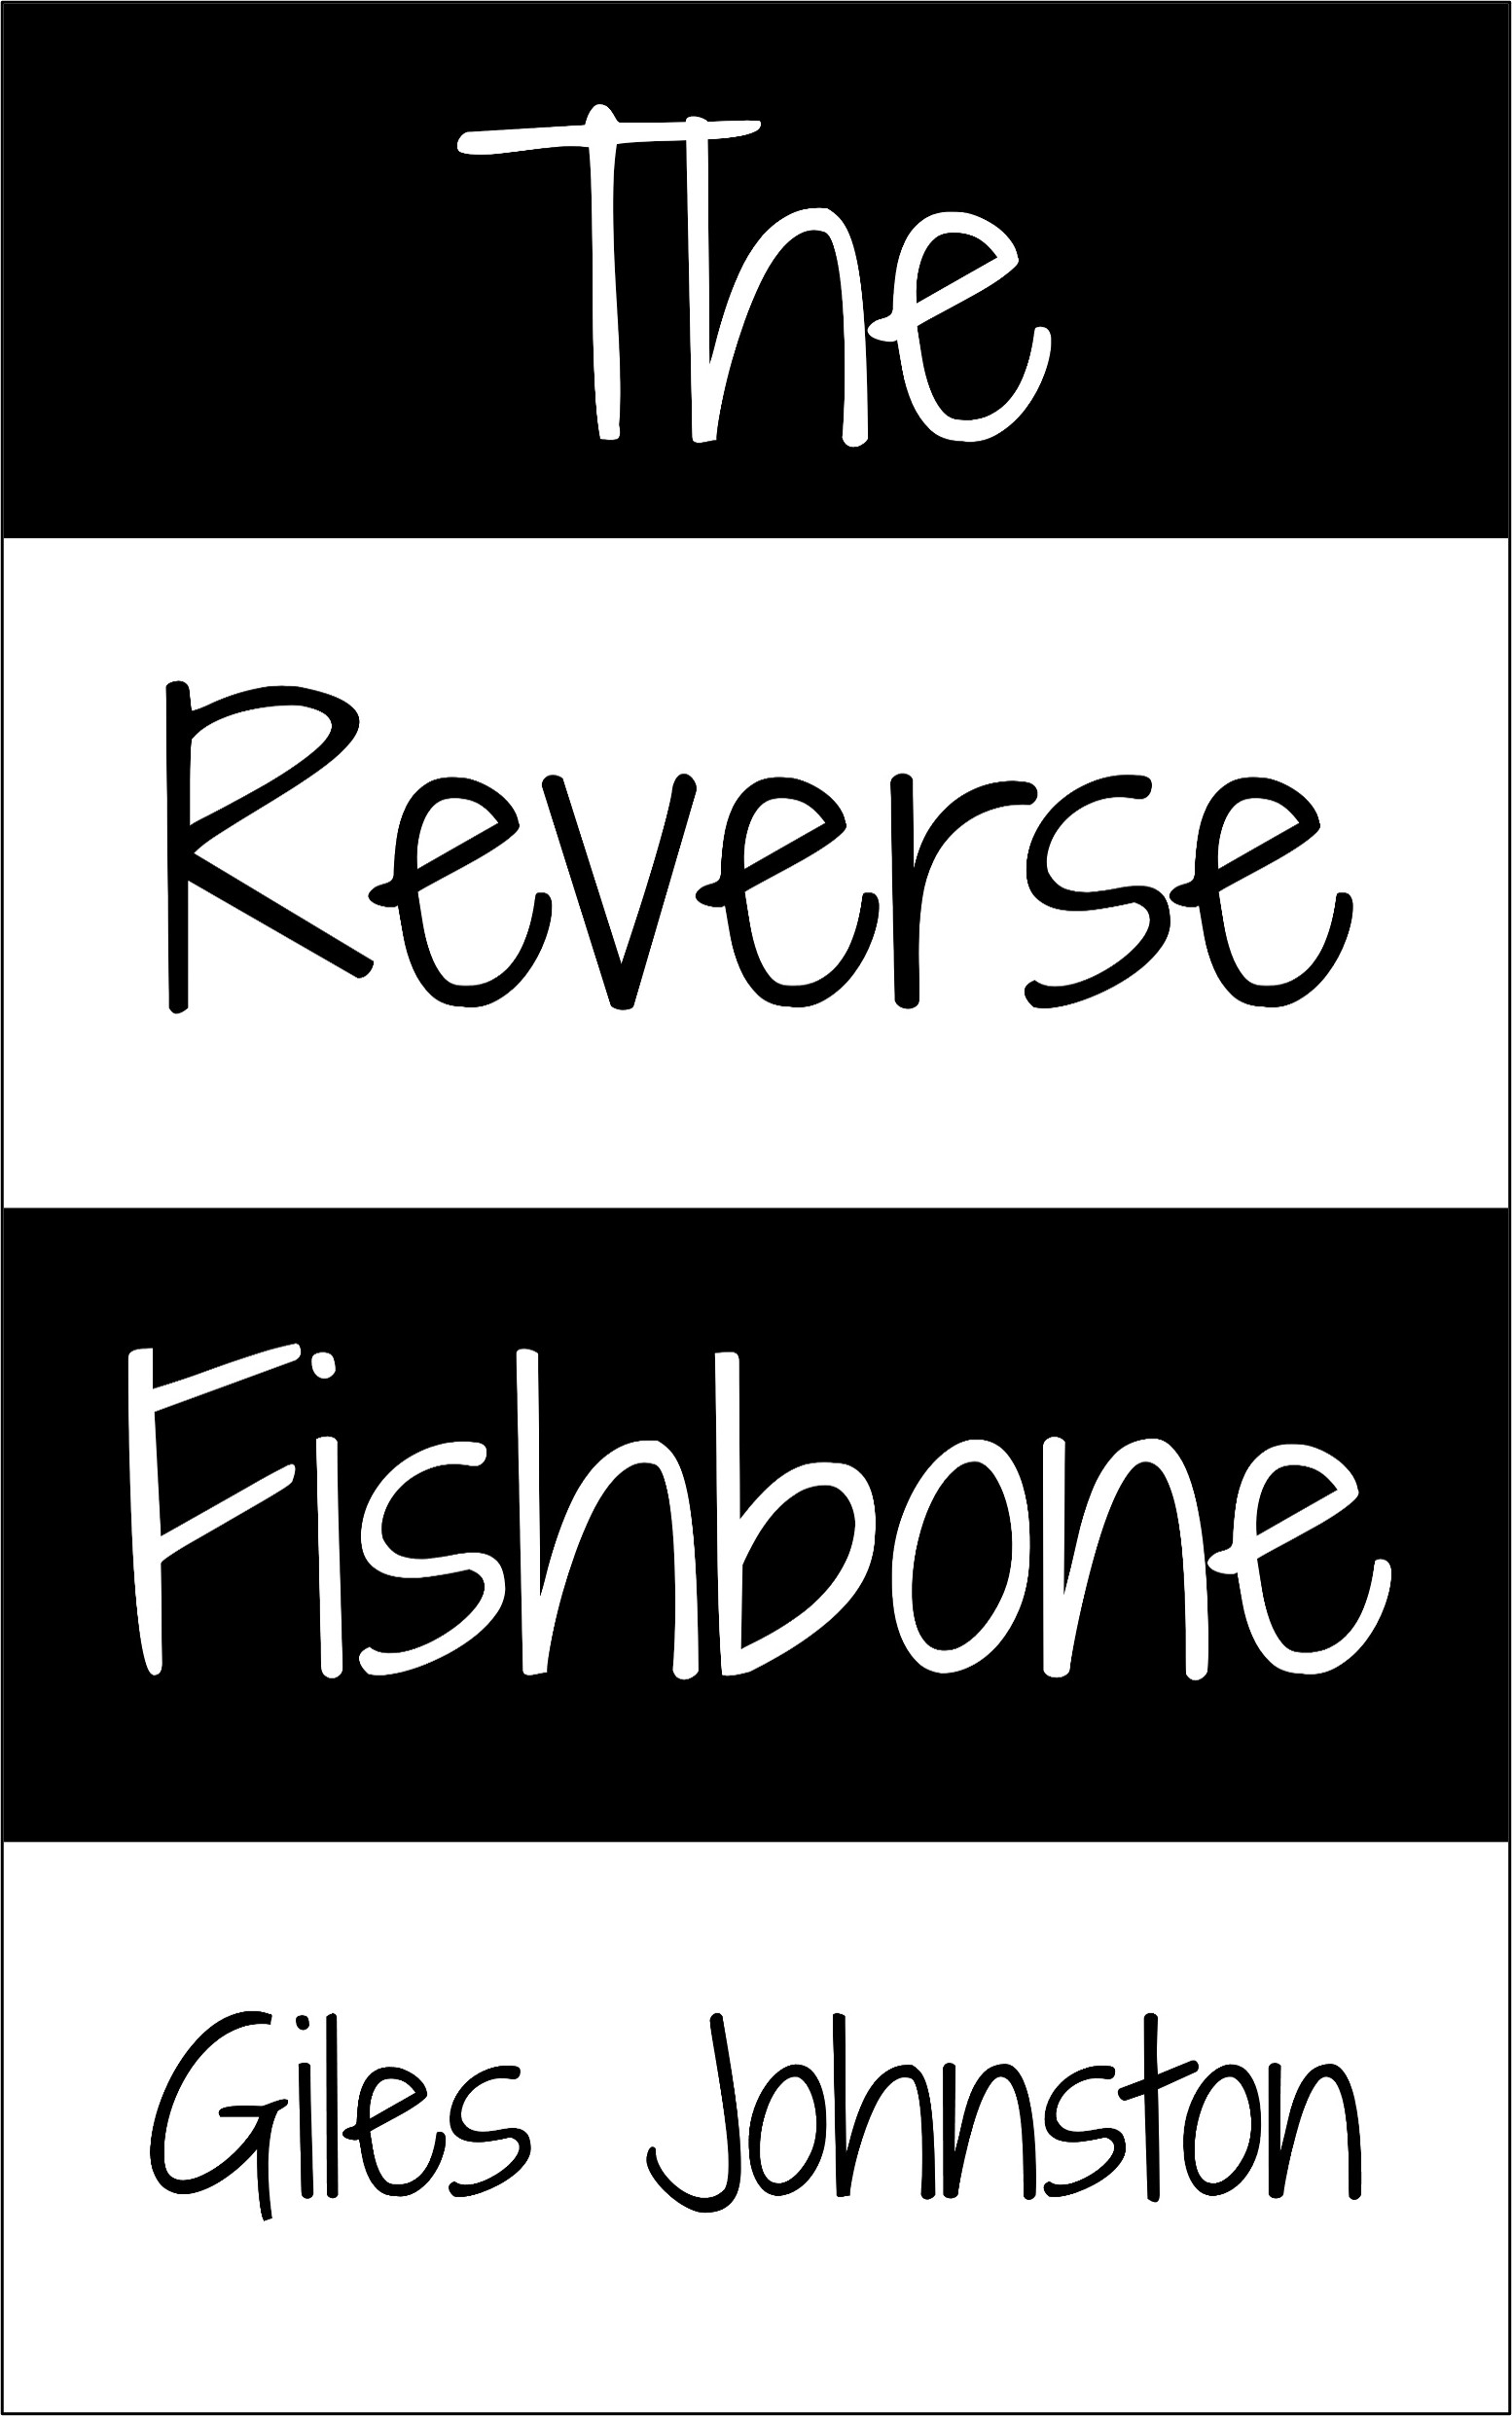 The Reverse Fishbone book is now available